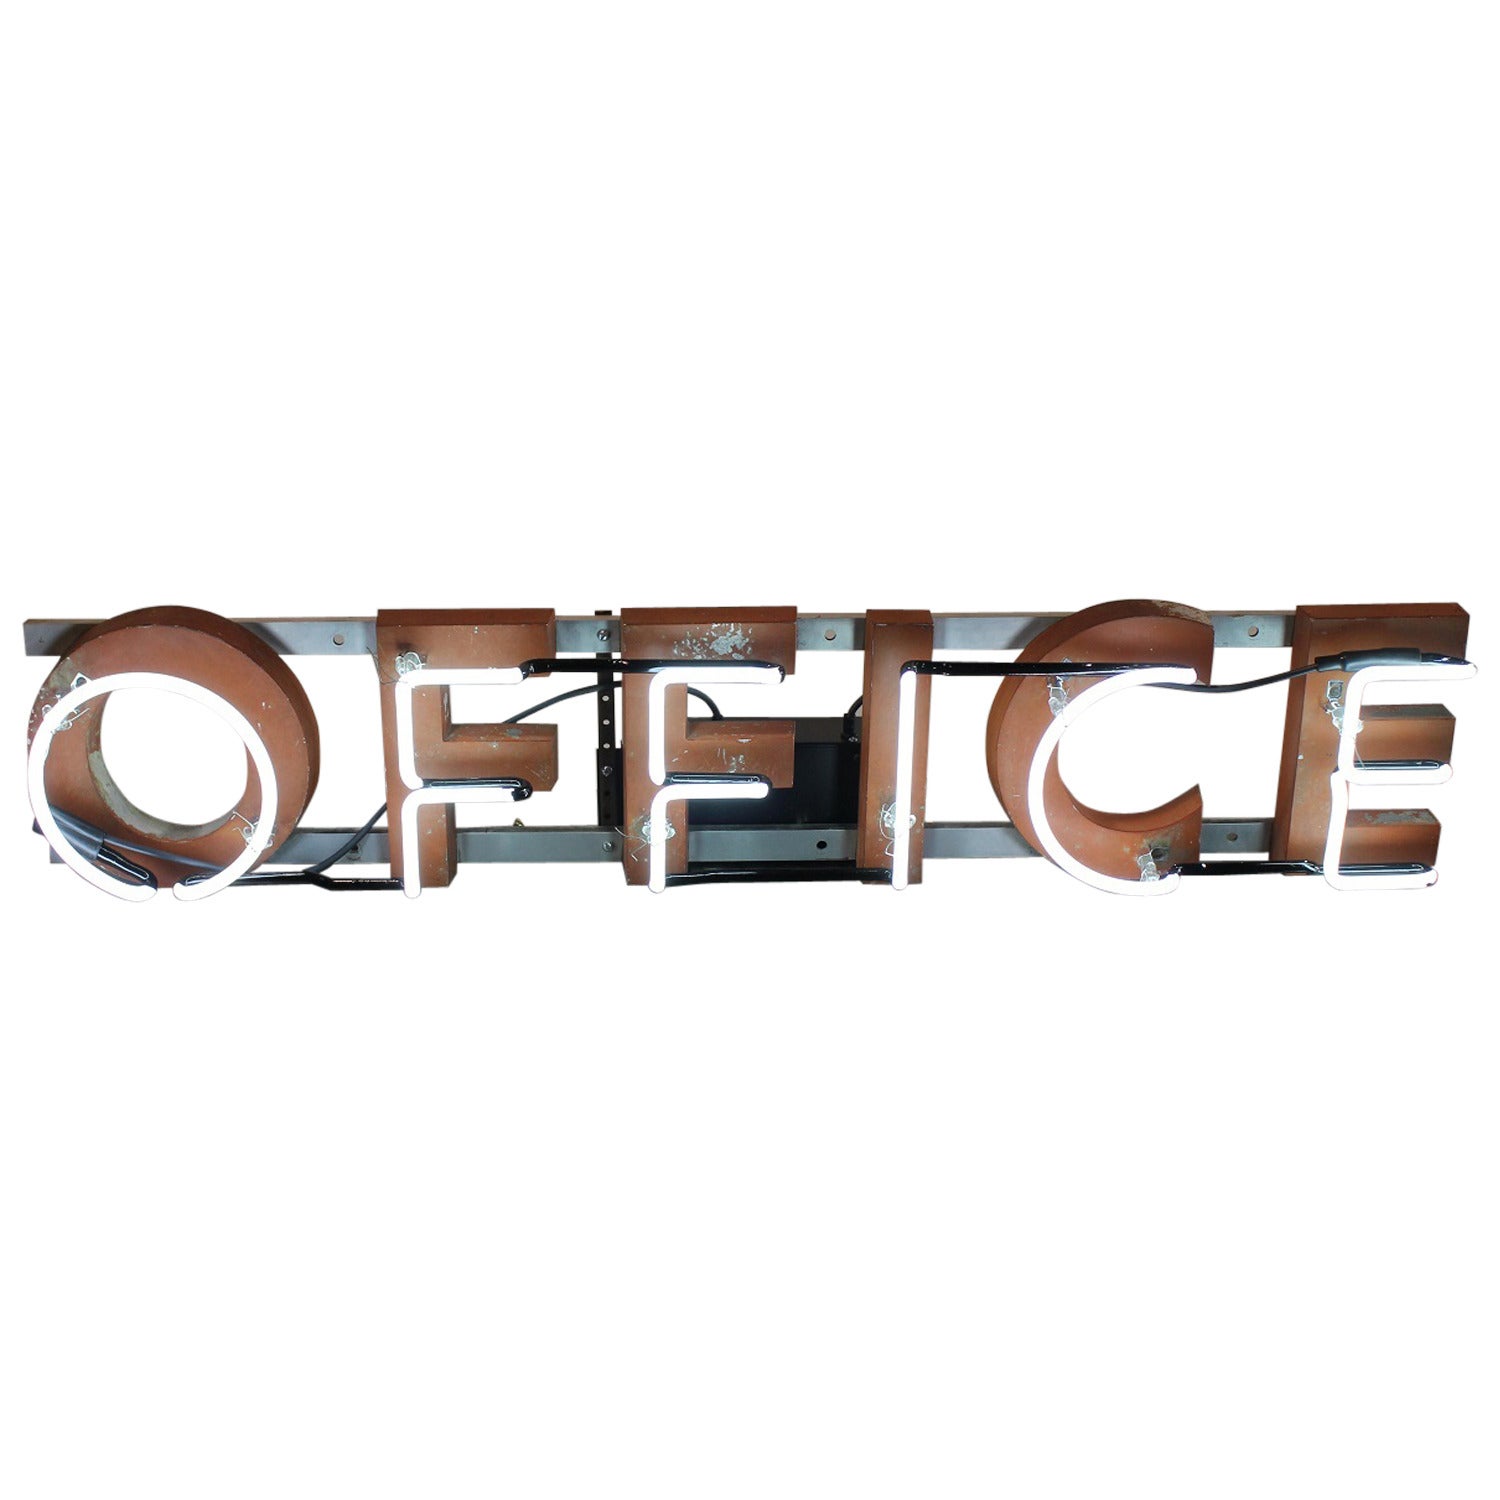 Vintage Neon Office Sign